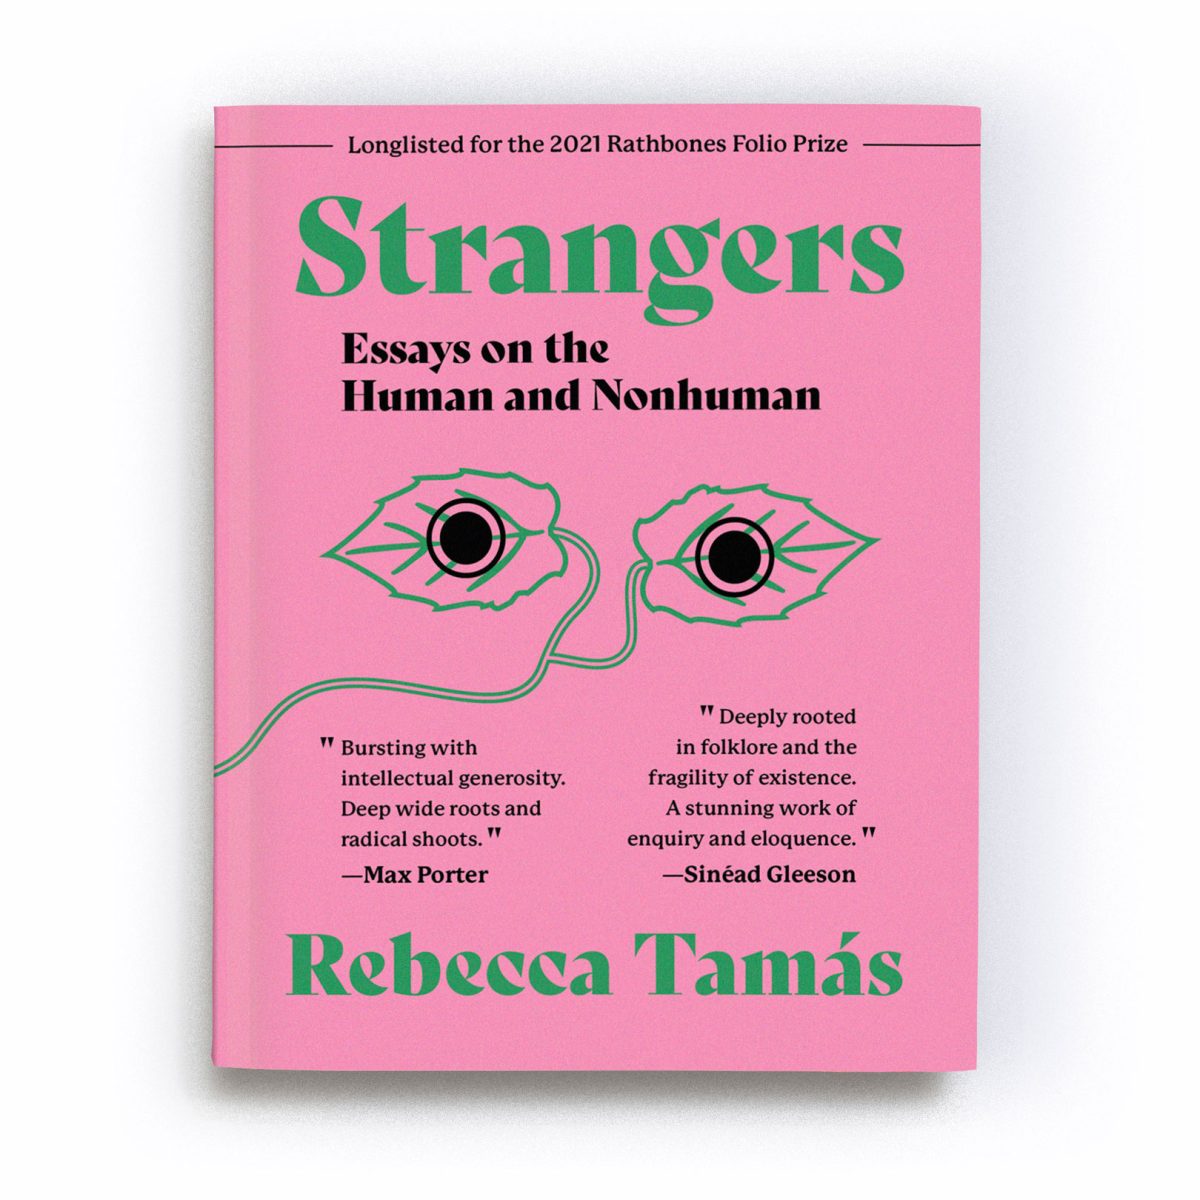 A render of the fourth printing of the book ‘Strangers: Essays on the Human and Nonhuman’. Along the top of the cover runs text that reads “Longlisted for the 2021 Rathbones Folio Prize”. In the centre of the cover is an abstract motif of two green leaves, joined by a stalk which winds from the centre to the bottom left of the cover. A black filled circle, outlined with a ring, overlays each leaf, giving the impression the leaves are a pair of eyes staring out at us from the cover. A quote by Max Porter reads “Bursting with intellectual generosity. Deep wide roots and radical shoots”, alongside a quote by Sinéad Gleeson which reads: 'Tamás’ essays are deeply rooted in folklore and the fragility of existence. A stunning work of enquiry and eloquence.' The text is a mixture of black and green in colour and is placed on a watermelon pink background.